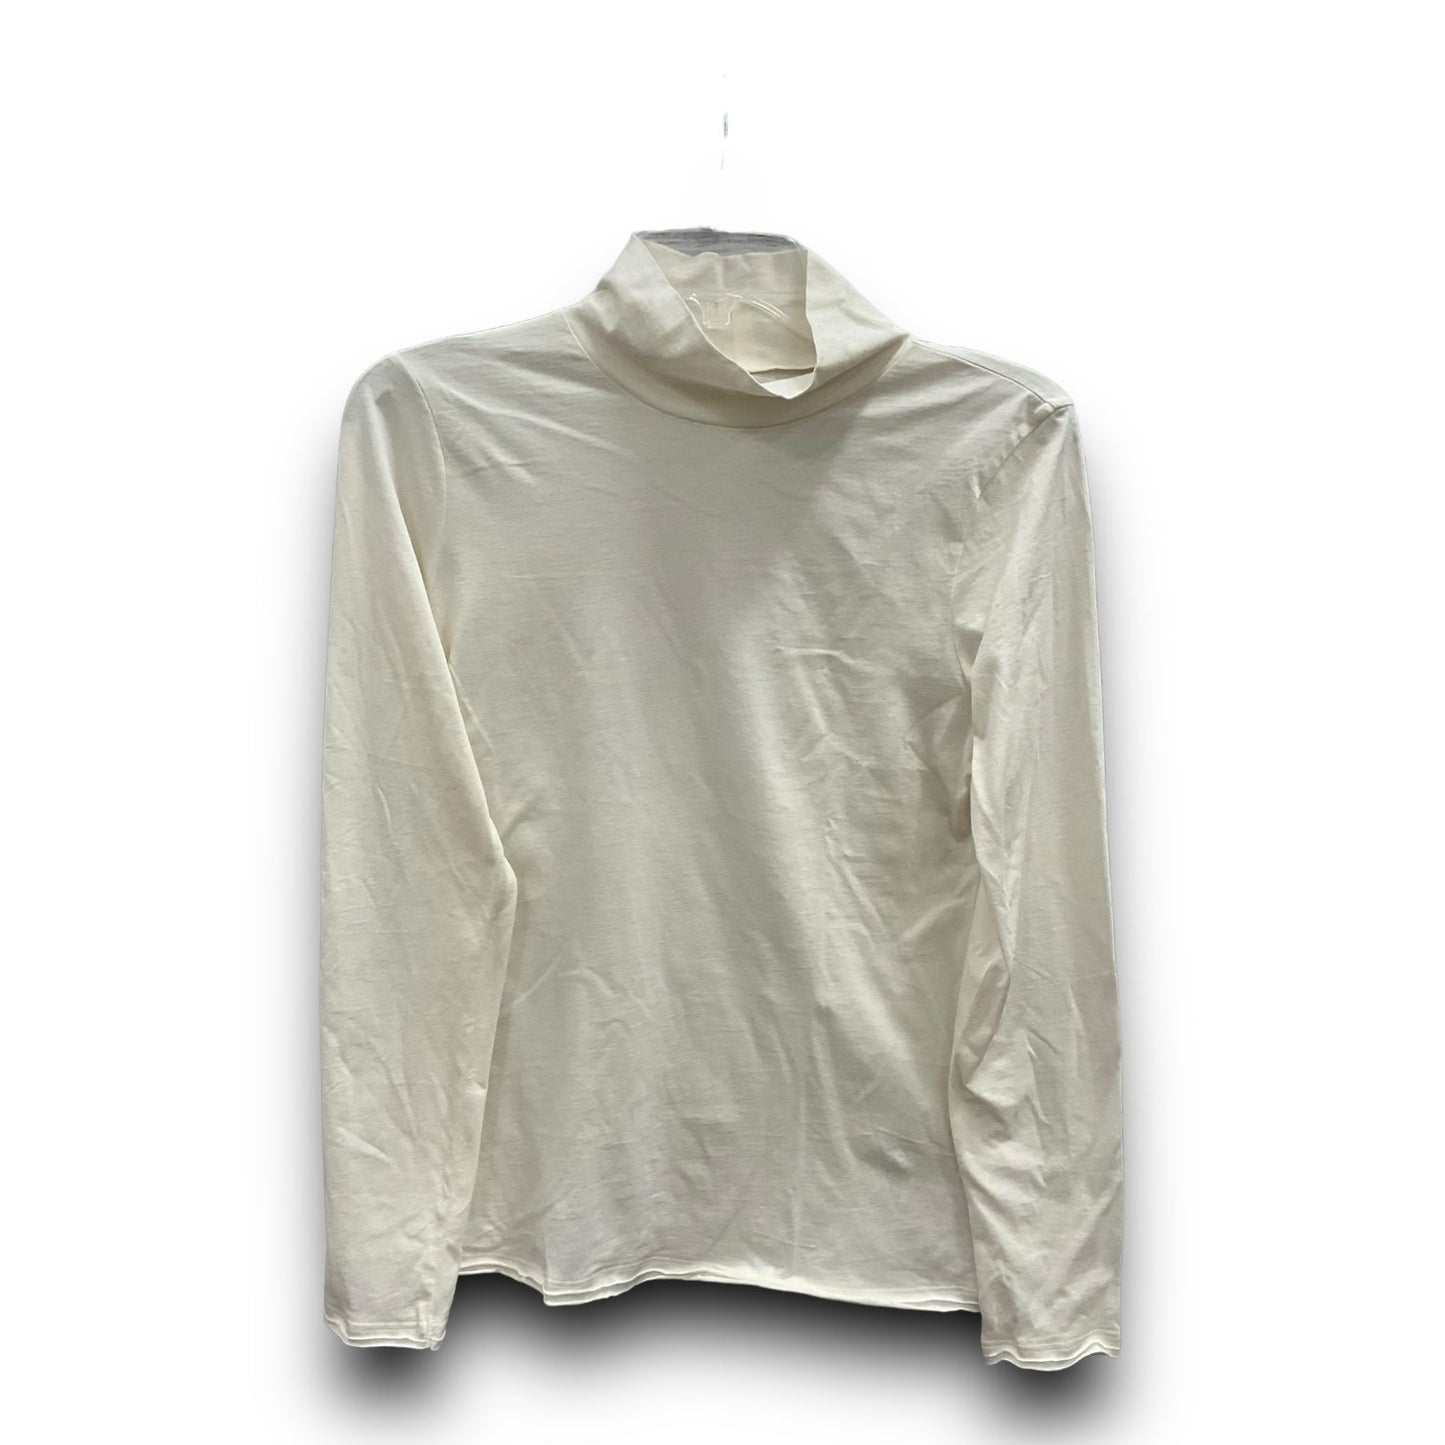 Cream Top Long Sleeve Anthropologie, Size M